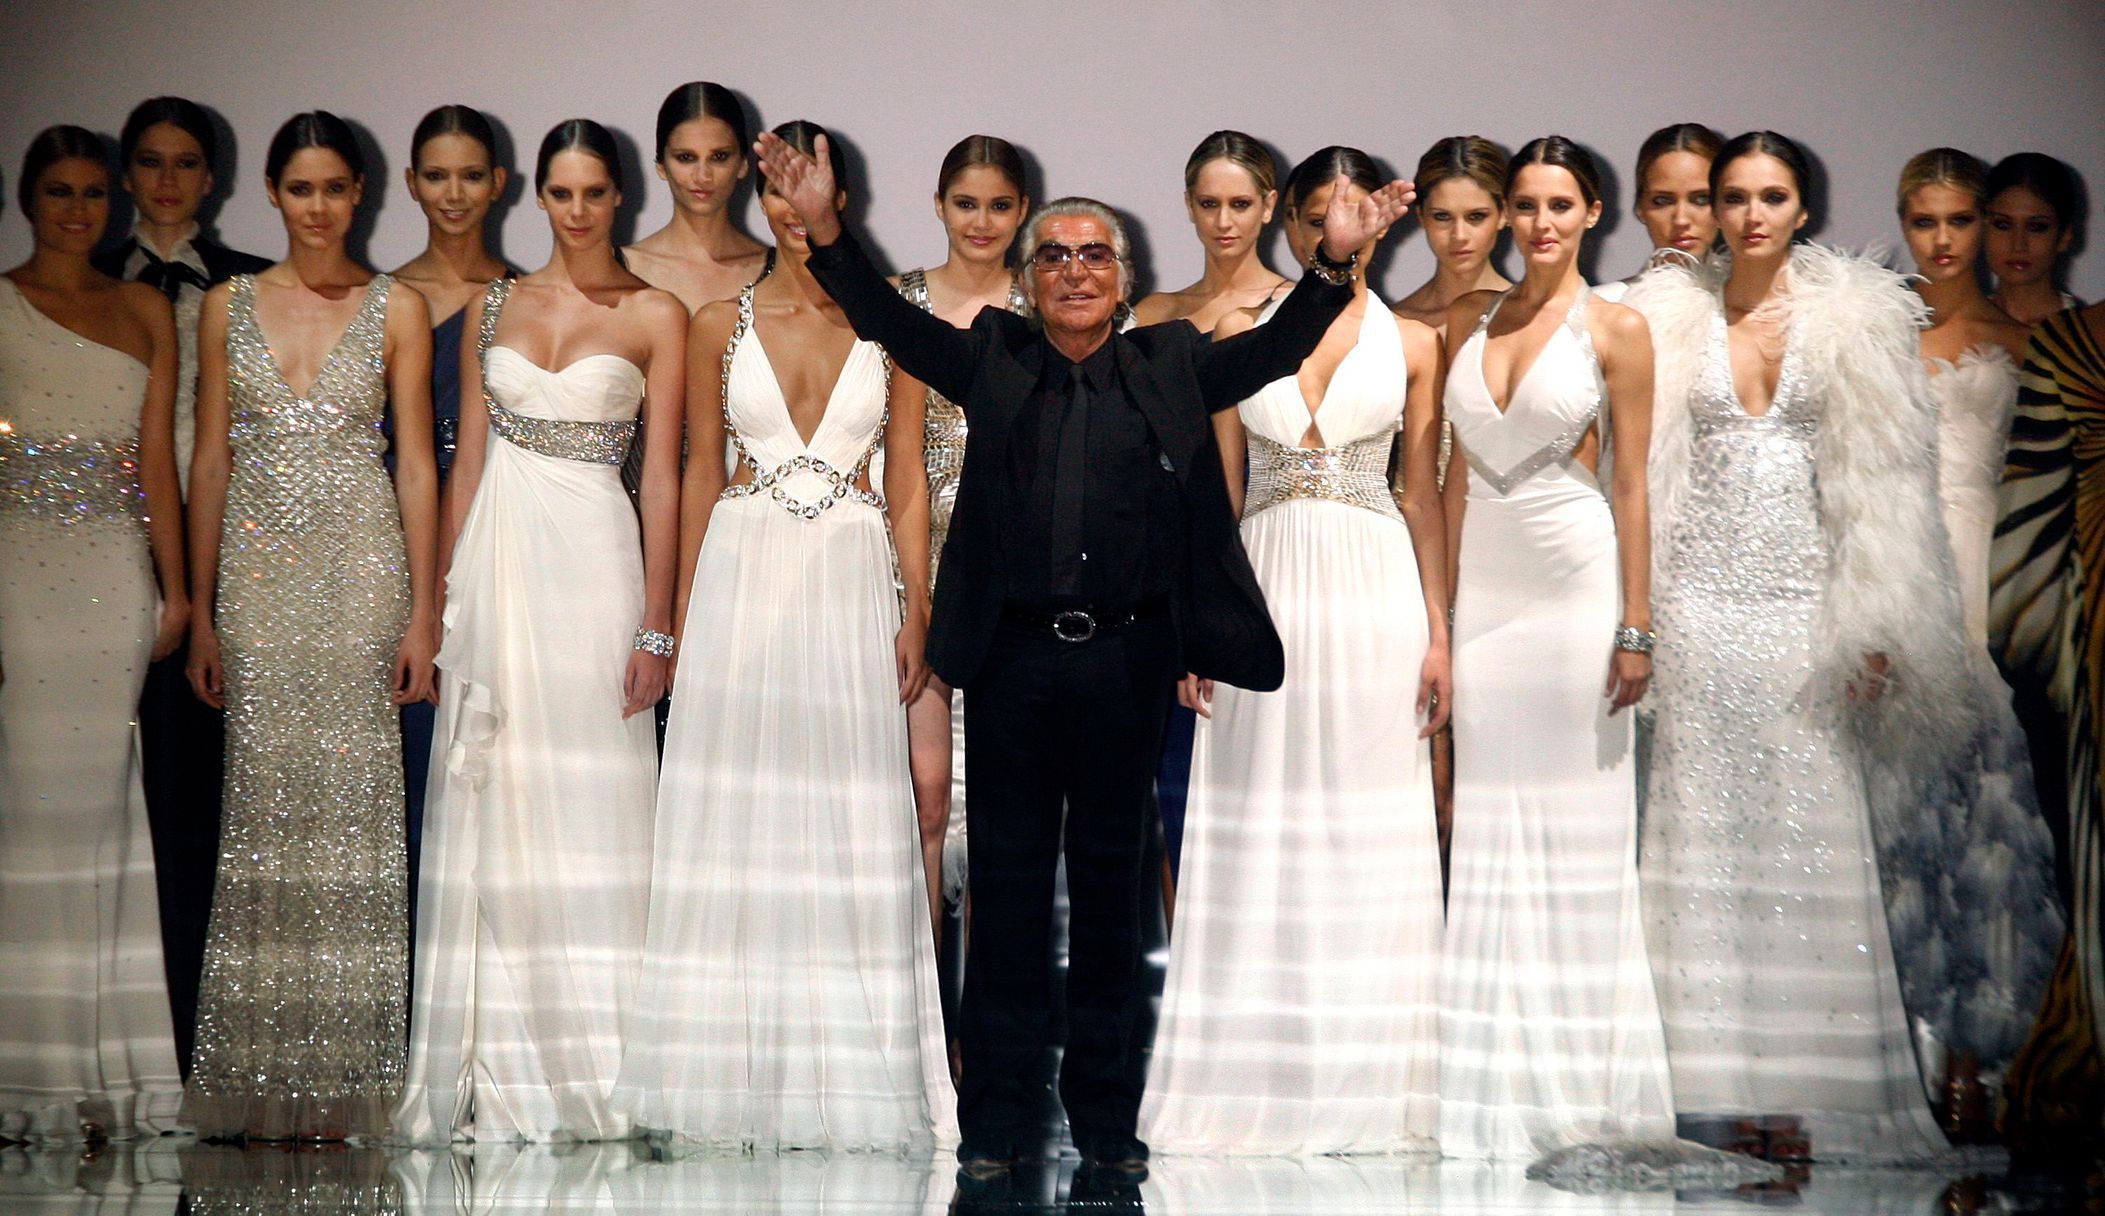 File photo shows Italian designer Roberto Cavalli acknowledging the crowd after models presented his collection during the Cali Exposhow in Cali